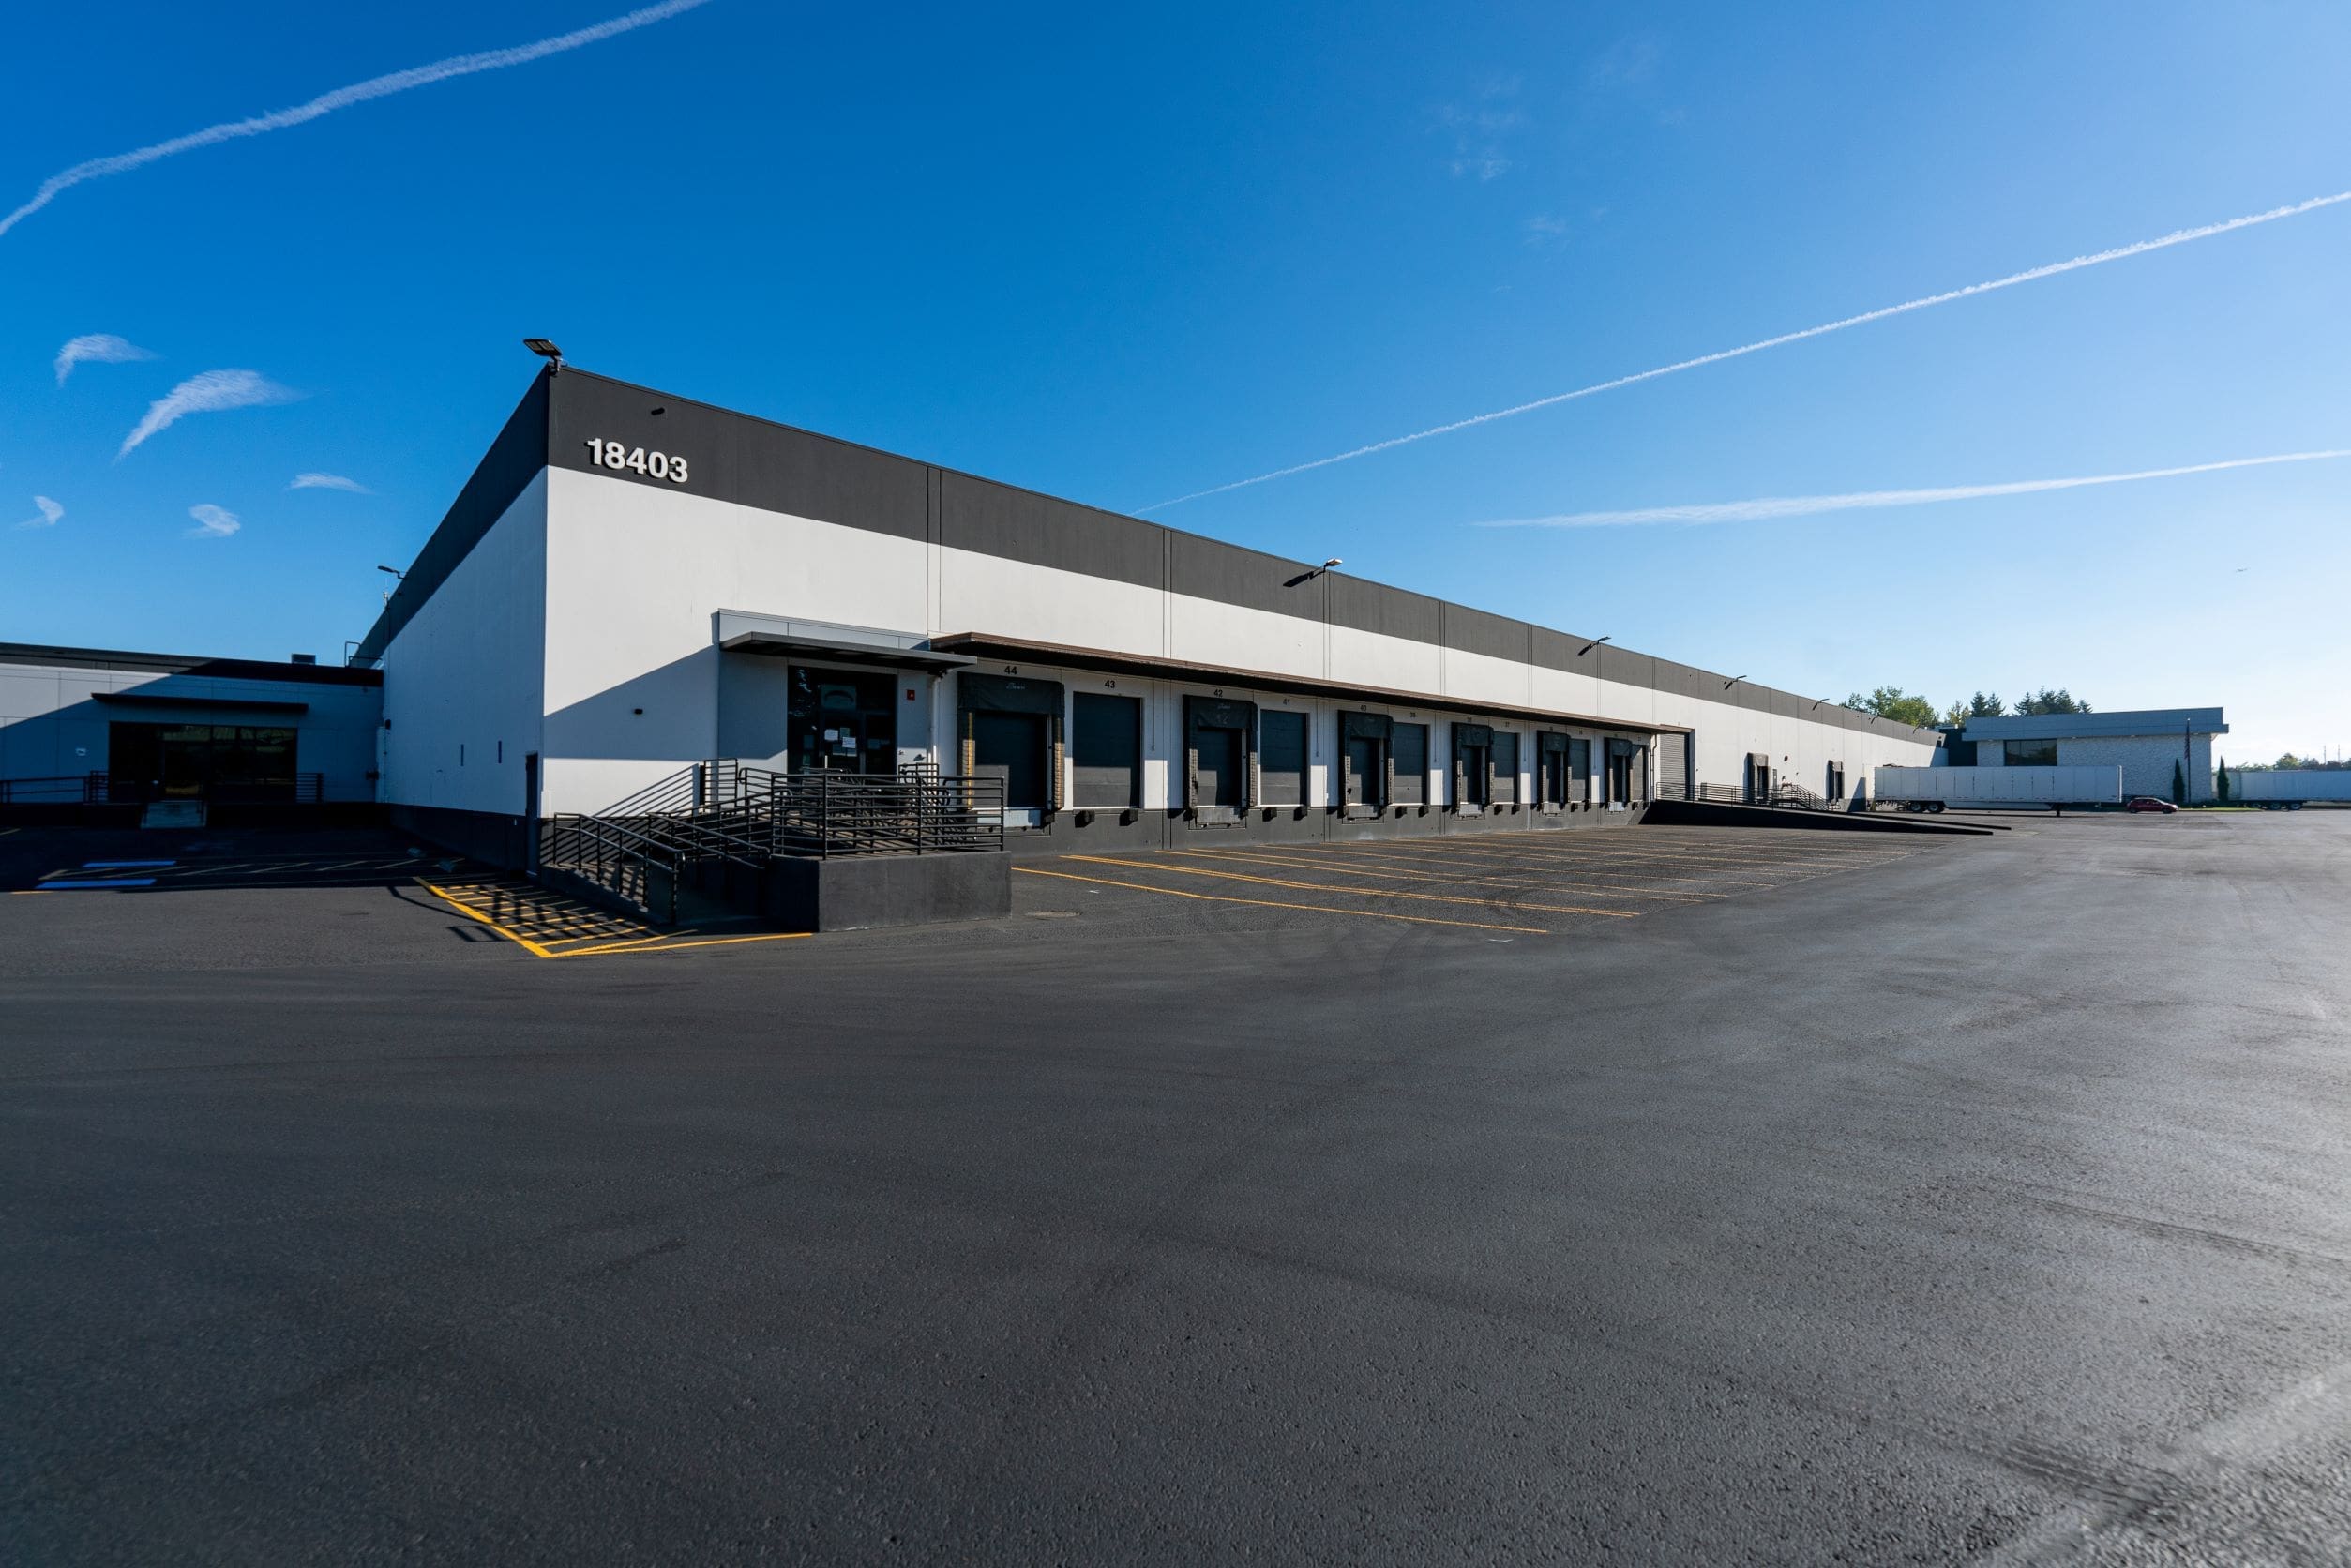 Westcore Acquires Industrial Property for 54 Million in